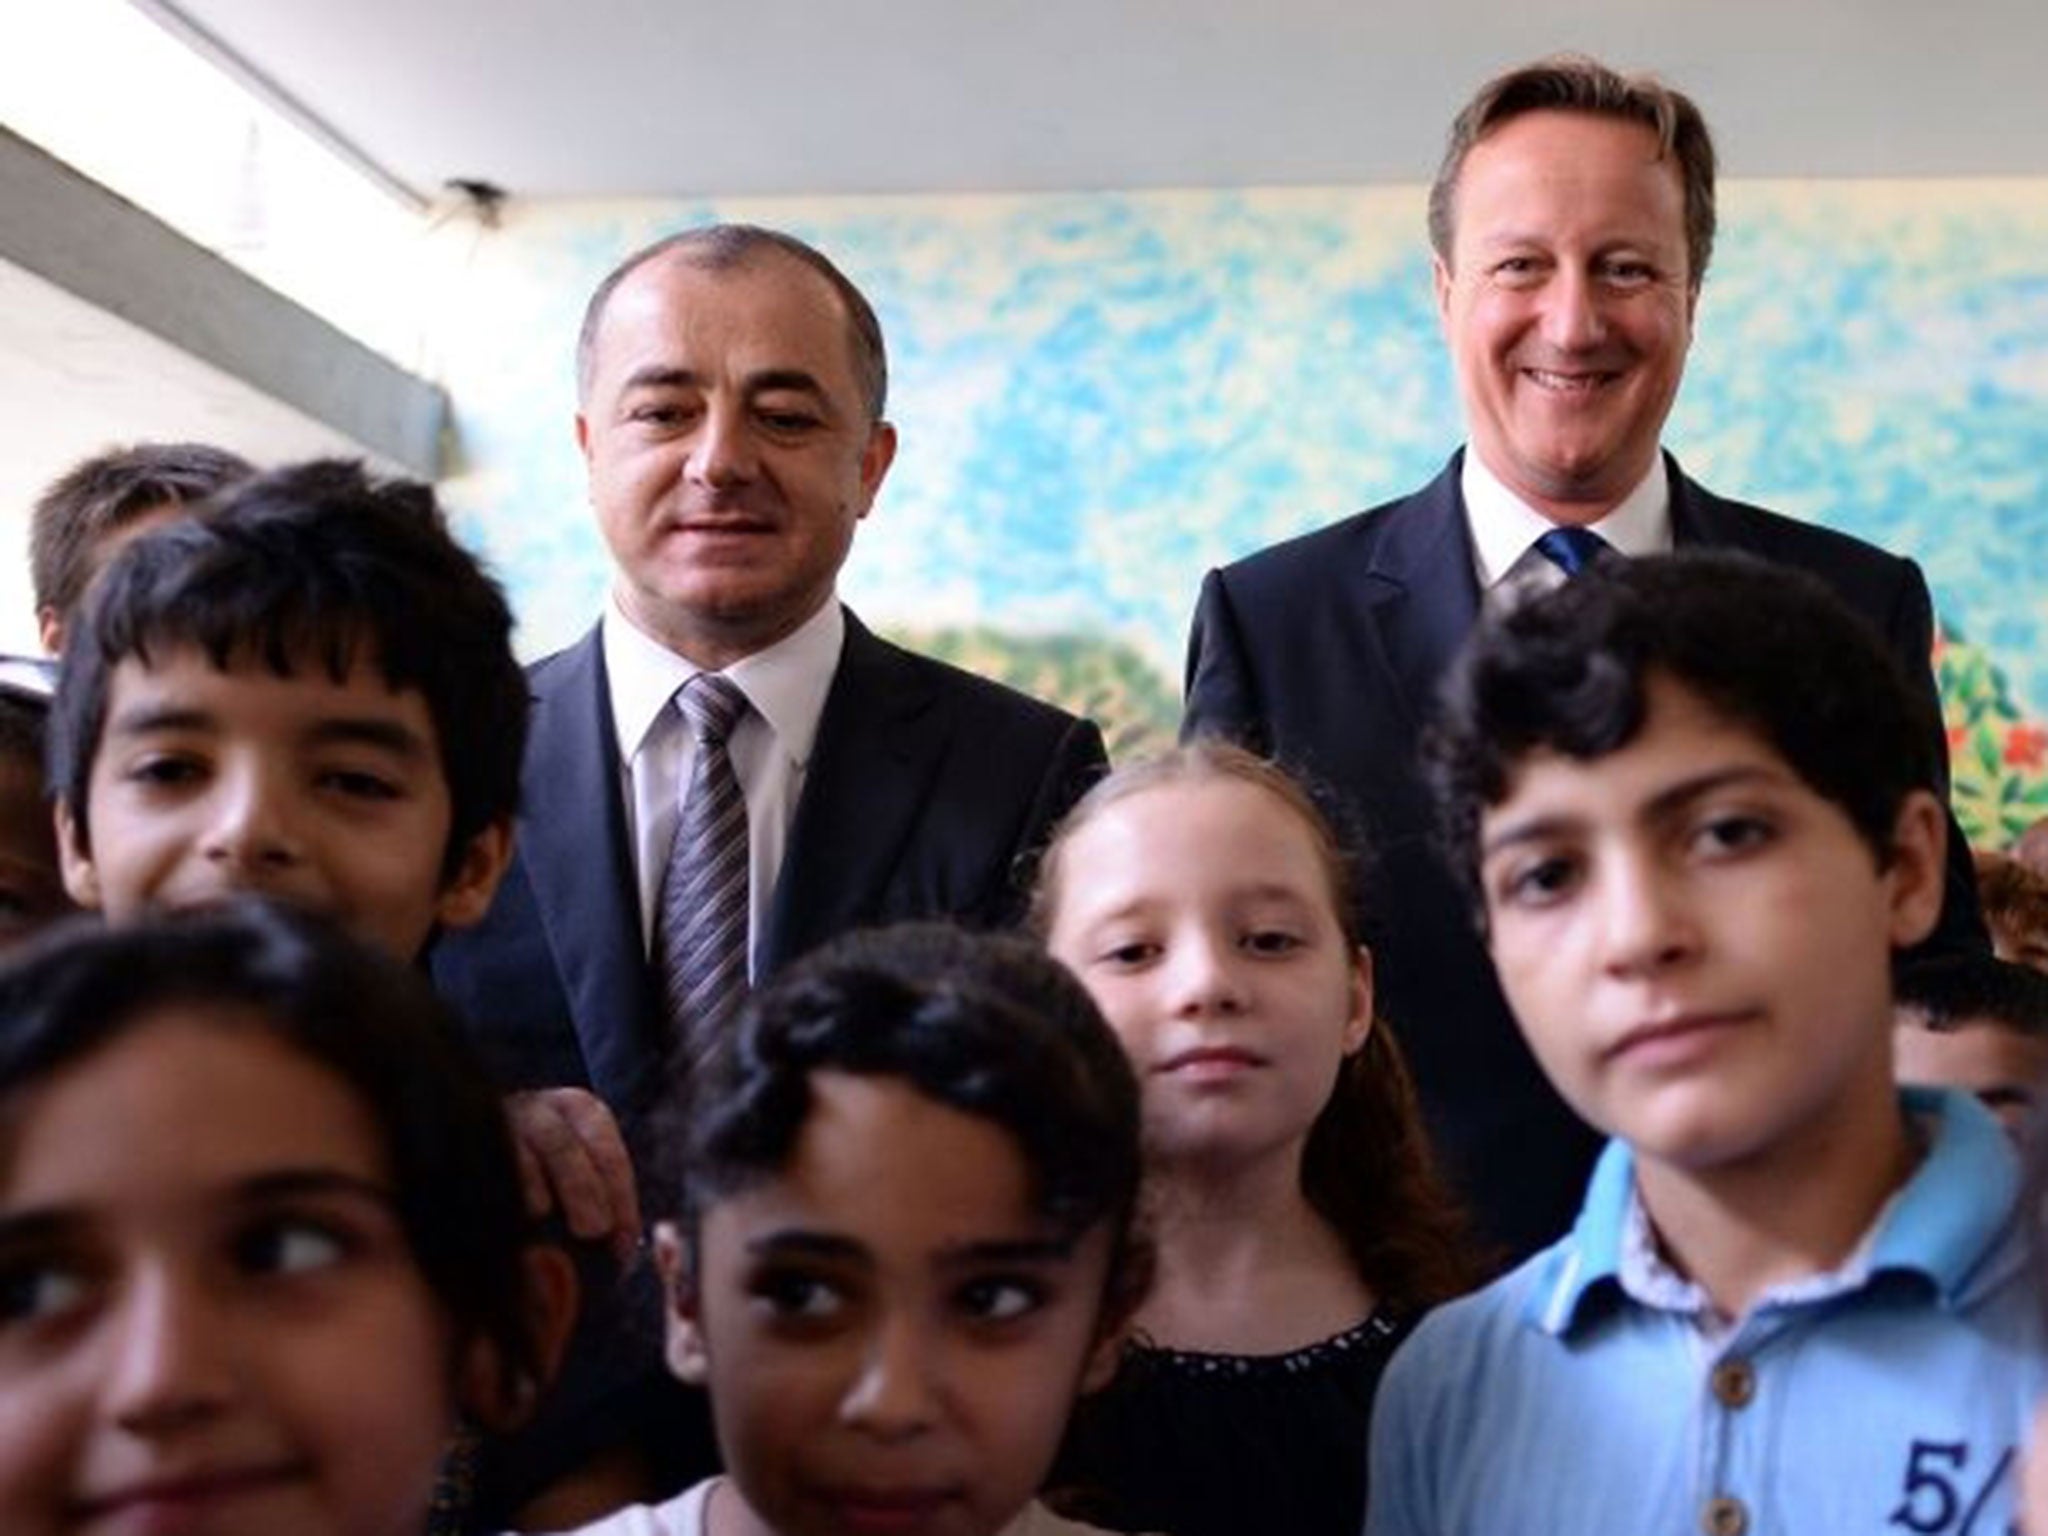 Lebanese Education Minister Elias Bou Saab stands beside Prime Minister David Cameron at the Sed El Boucrieh School in Beirut